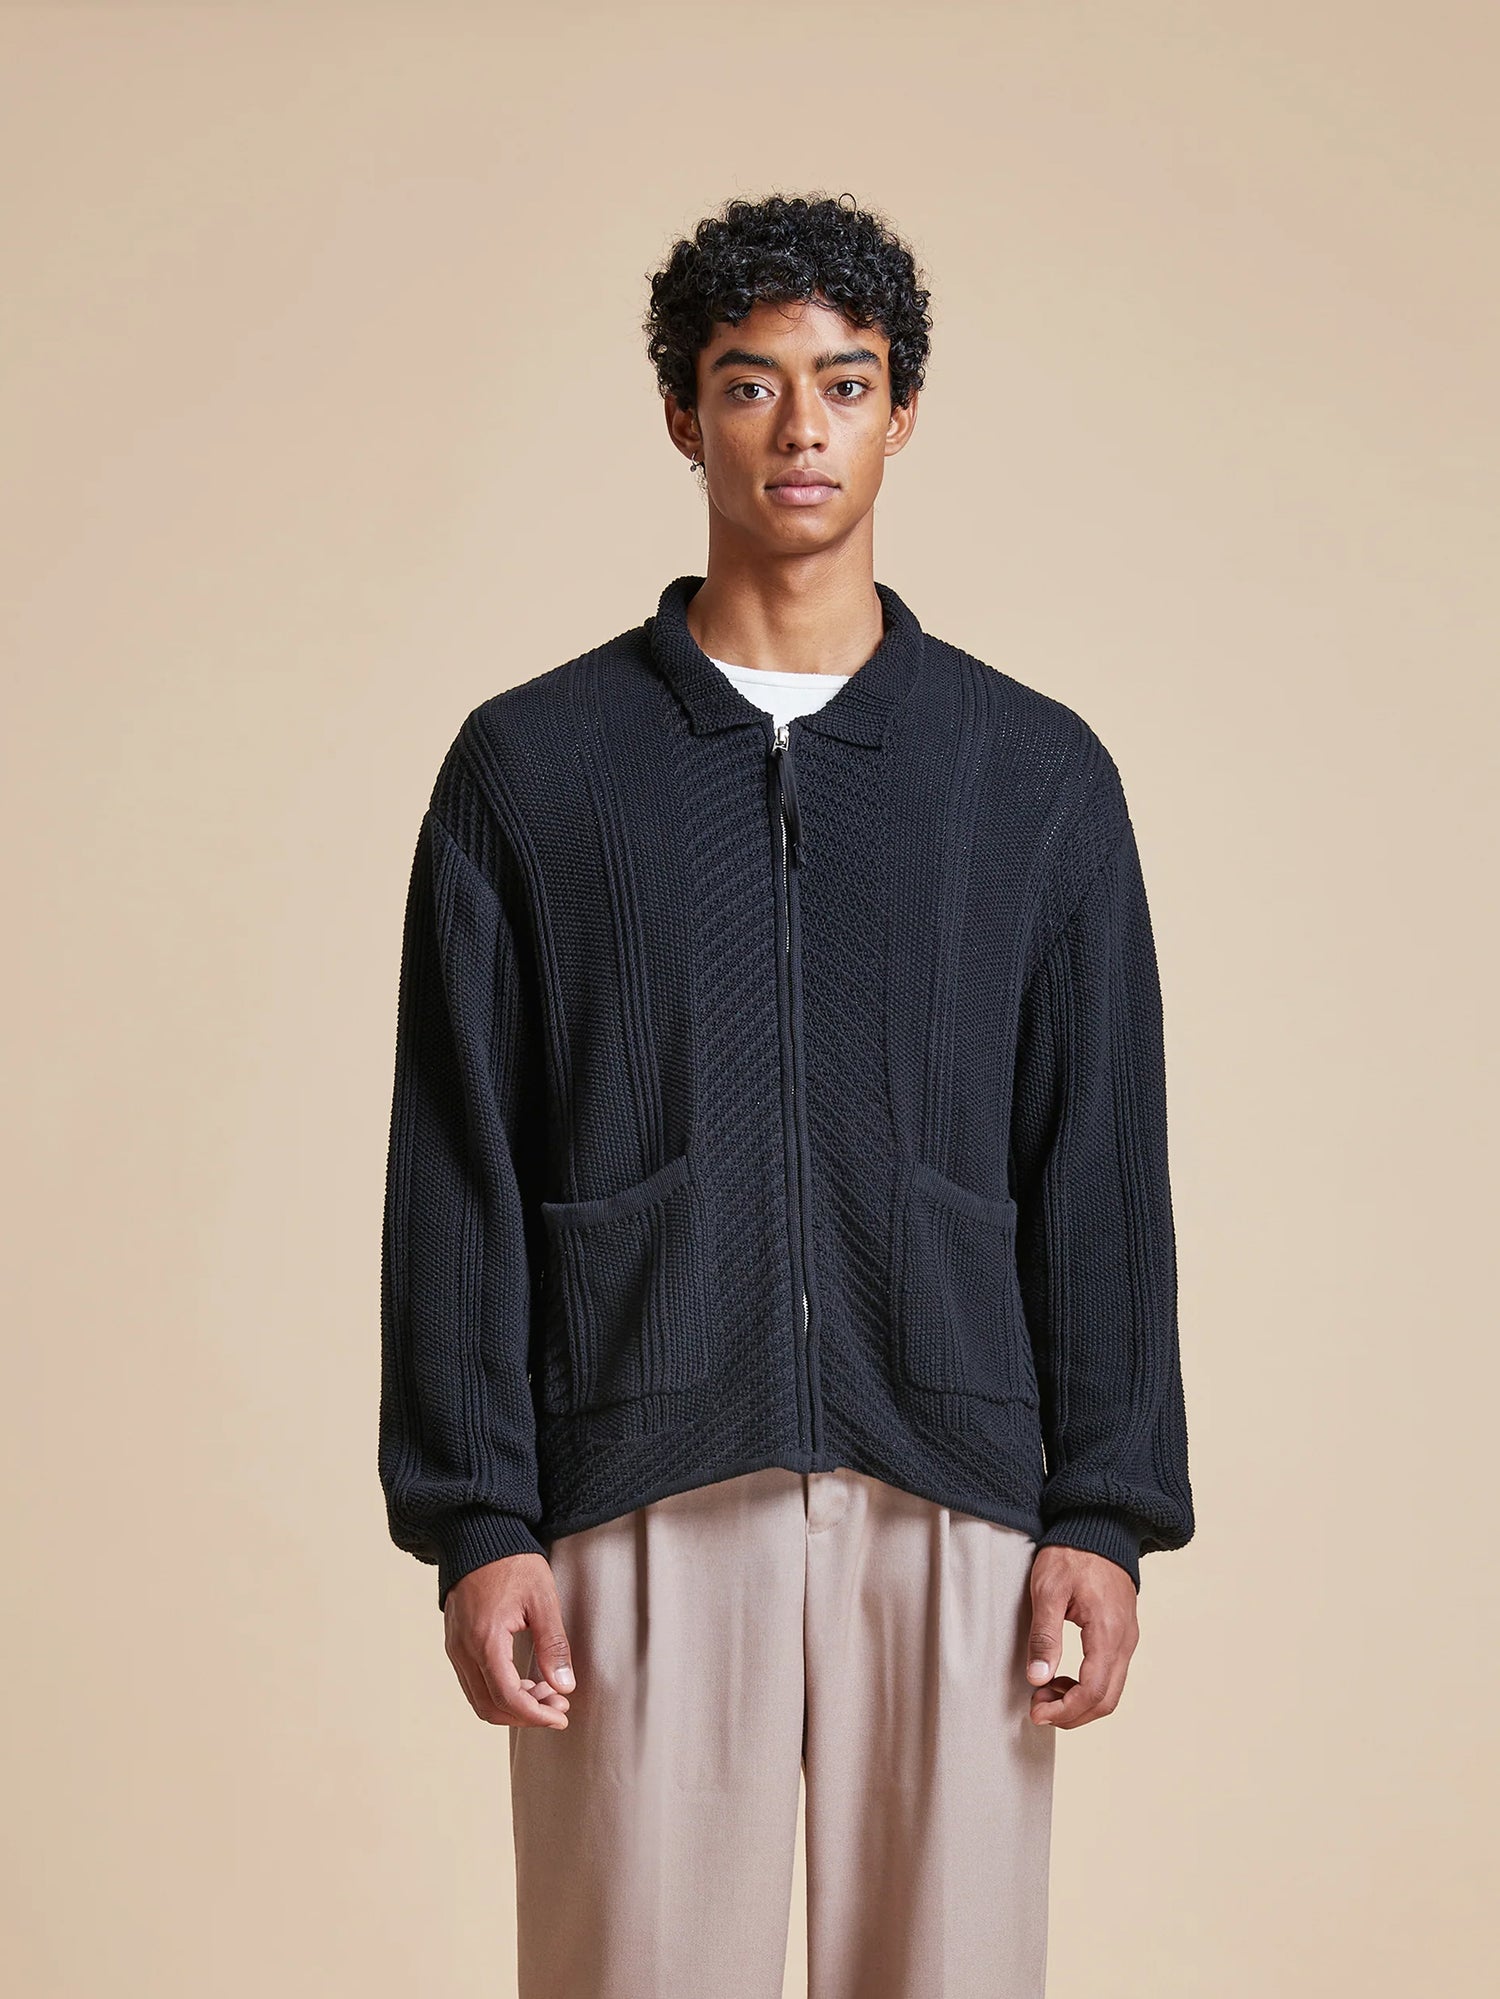 The model is wearing a Found Zip Up Panel Knit Ribbed Sweater.